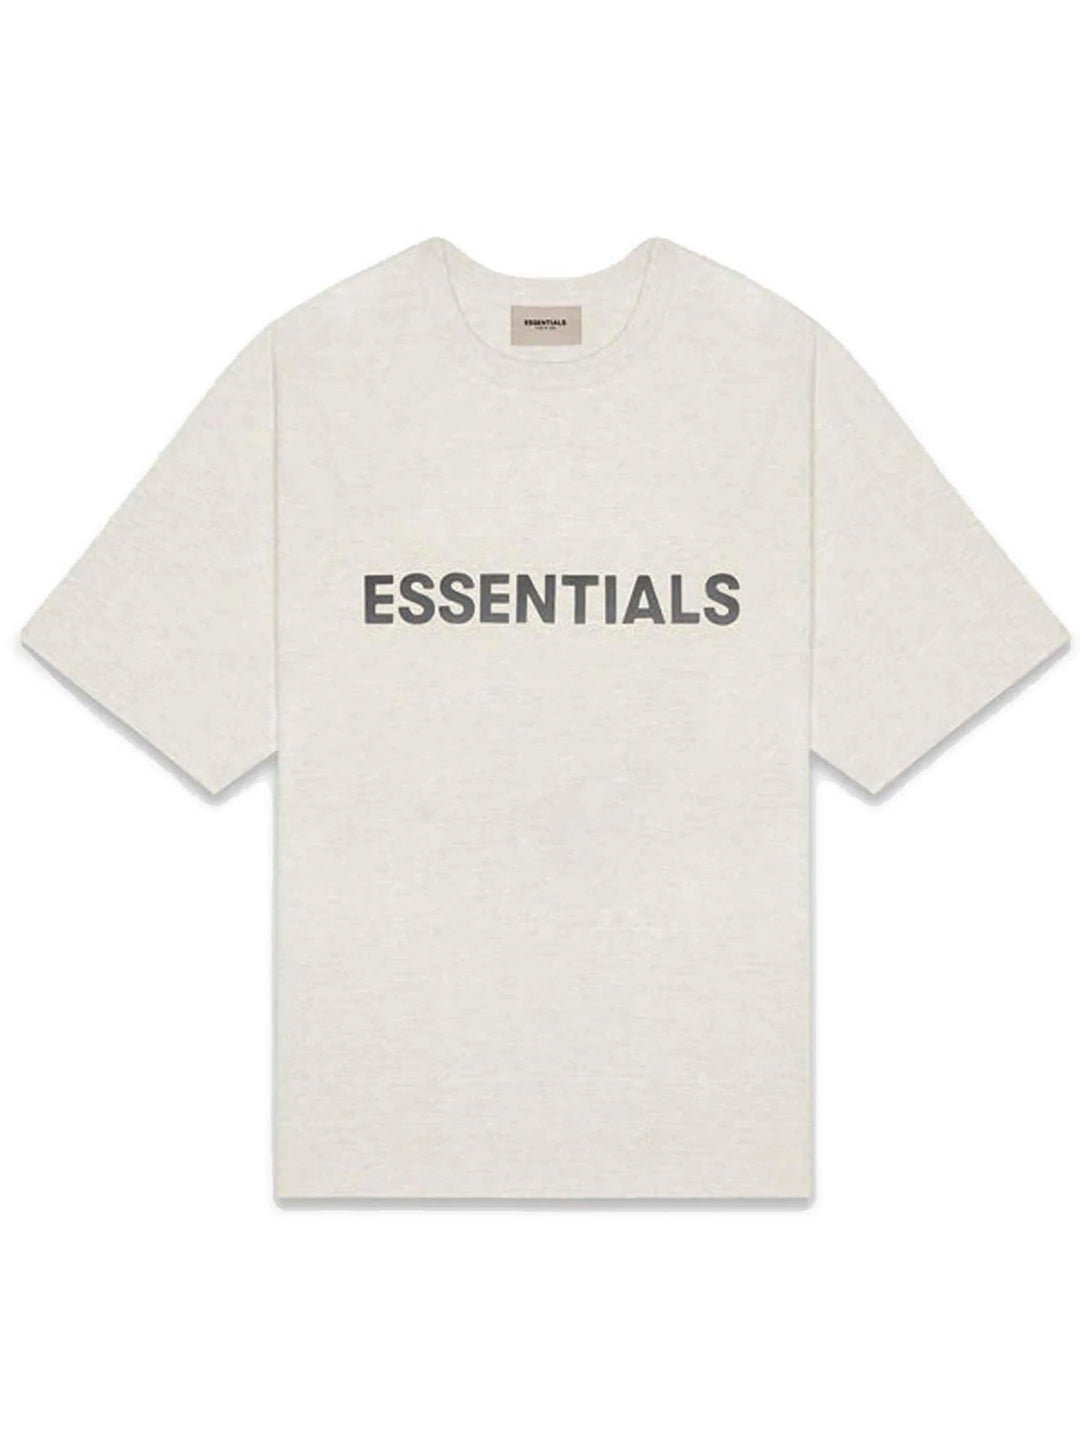 Fear Of God Essentials 3D Silicon Applique Boxy T-Shirt Oatmeal Prior